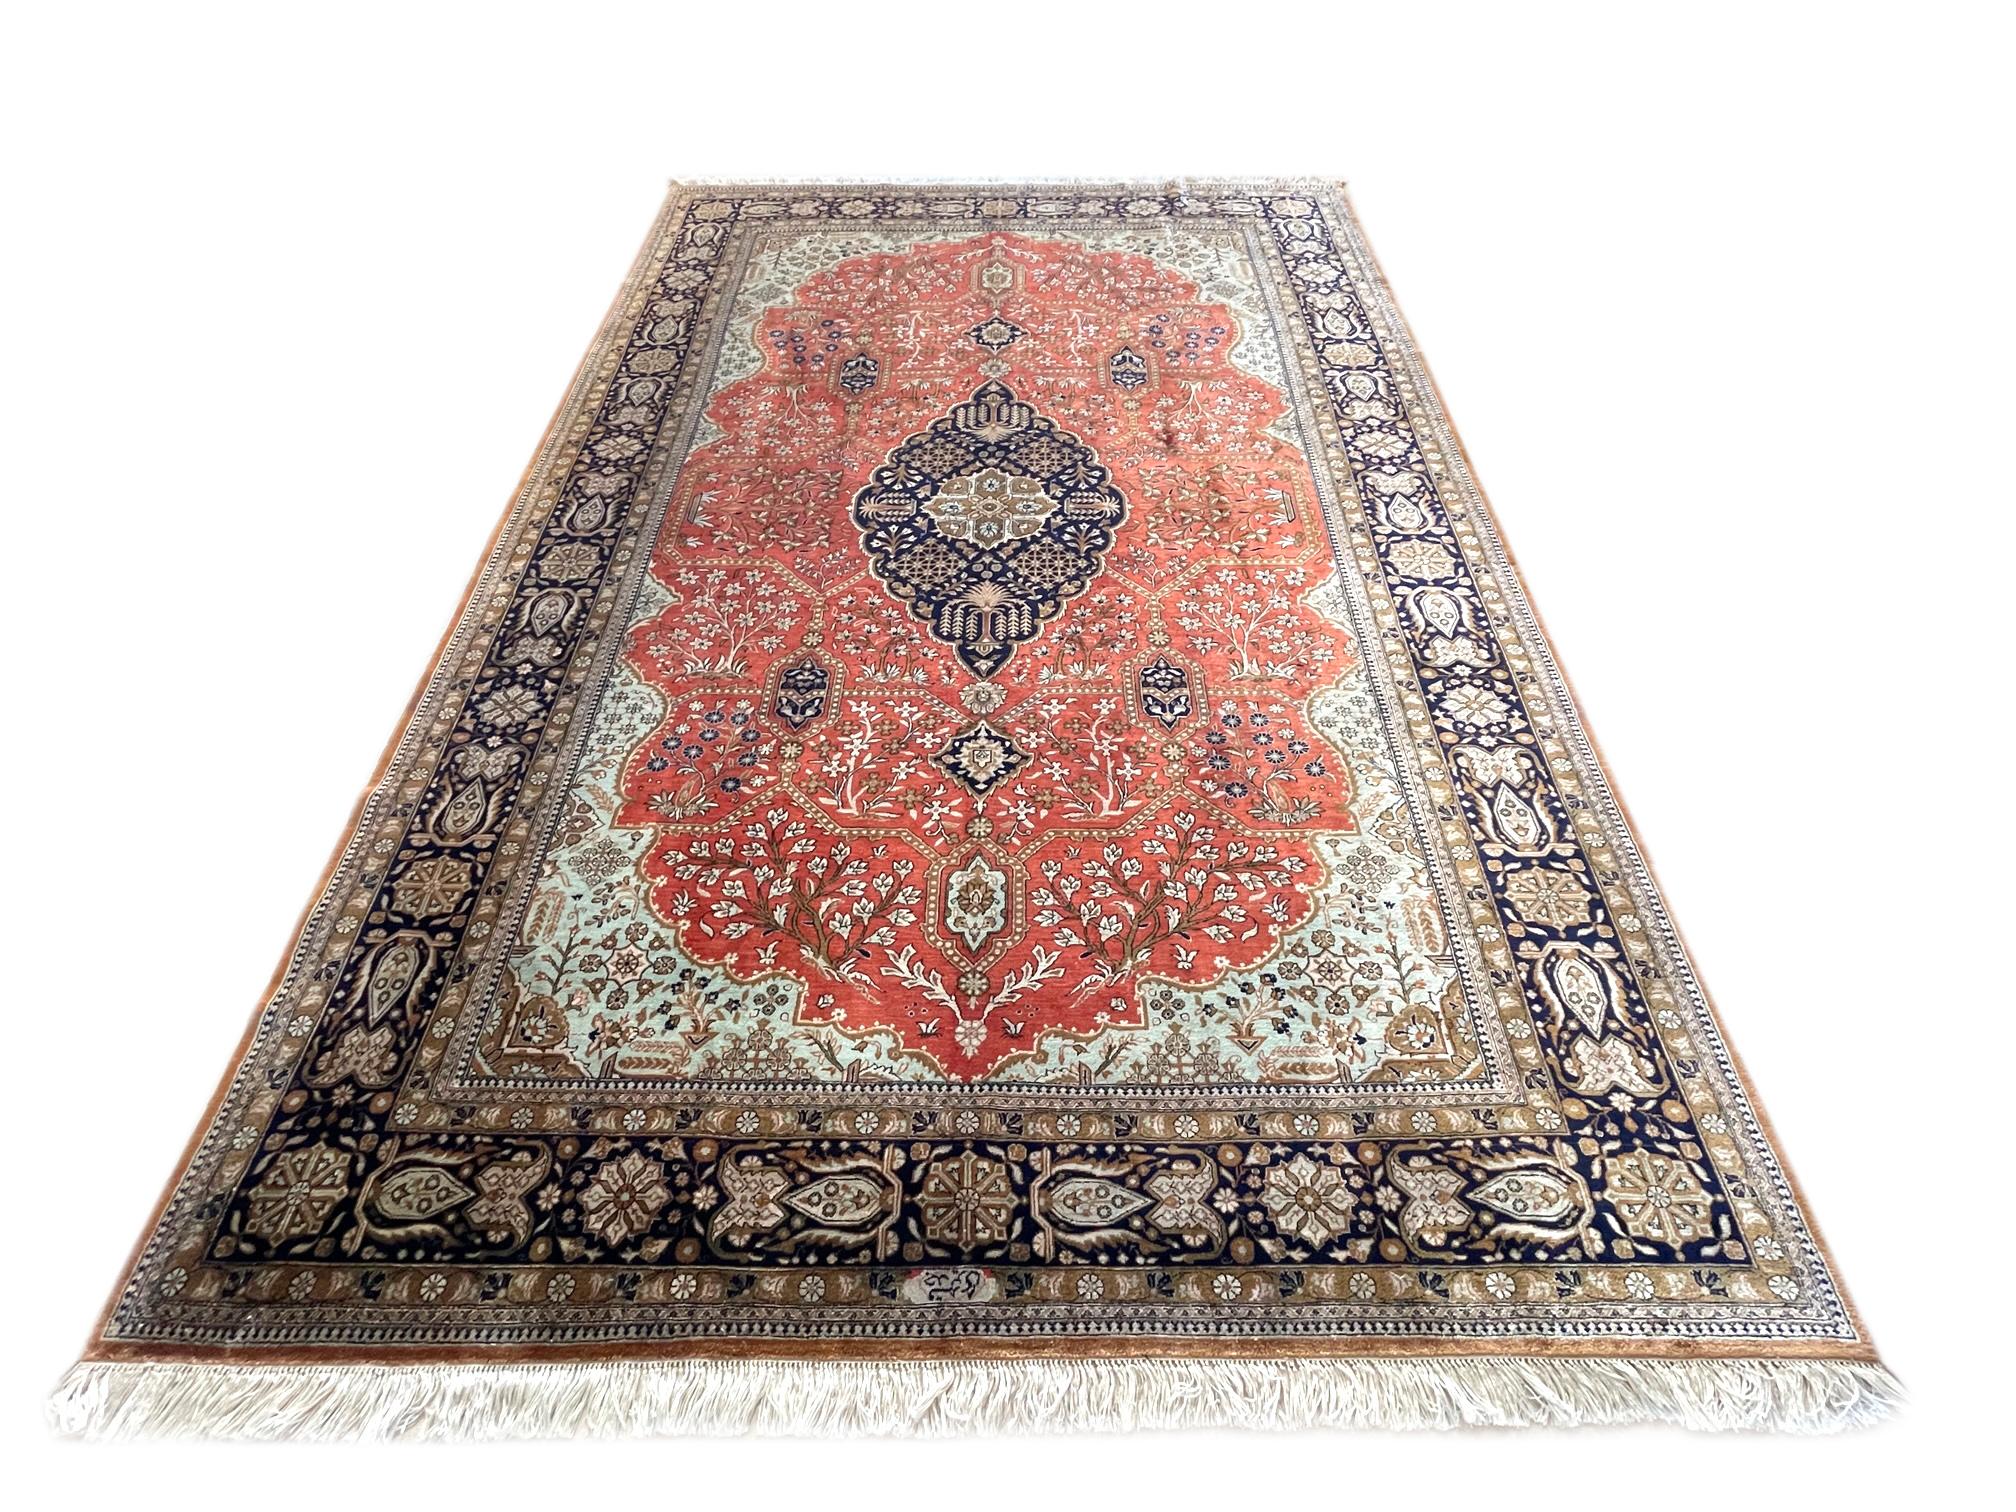 This is a very fine rug weaved in city of Qum, Iran. This rug has silk pile and foundation, with a stunning design and color combination woven onto an orange red background with a dark blue border. The design in this piece is a Josheghan design with